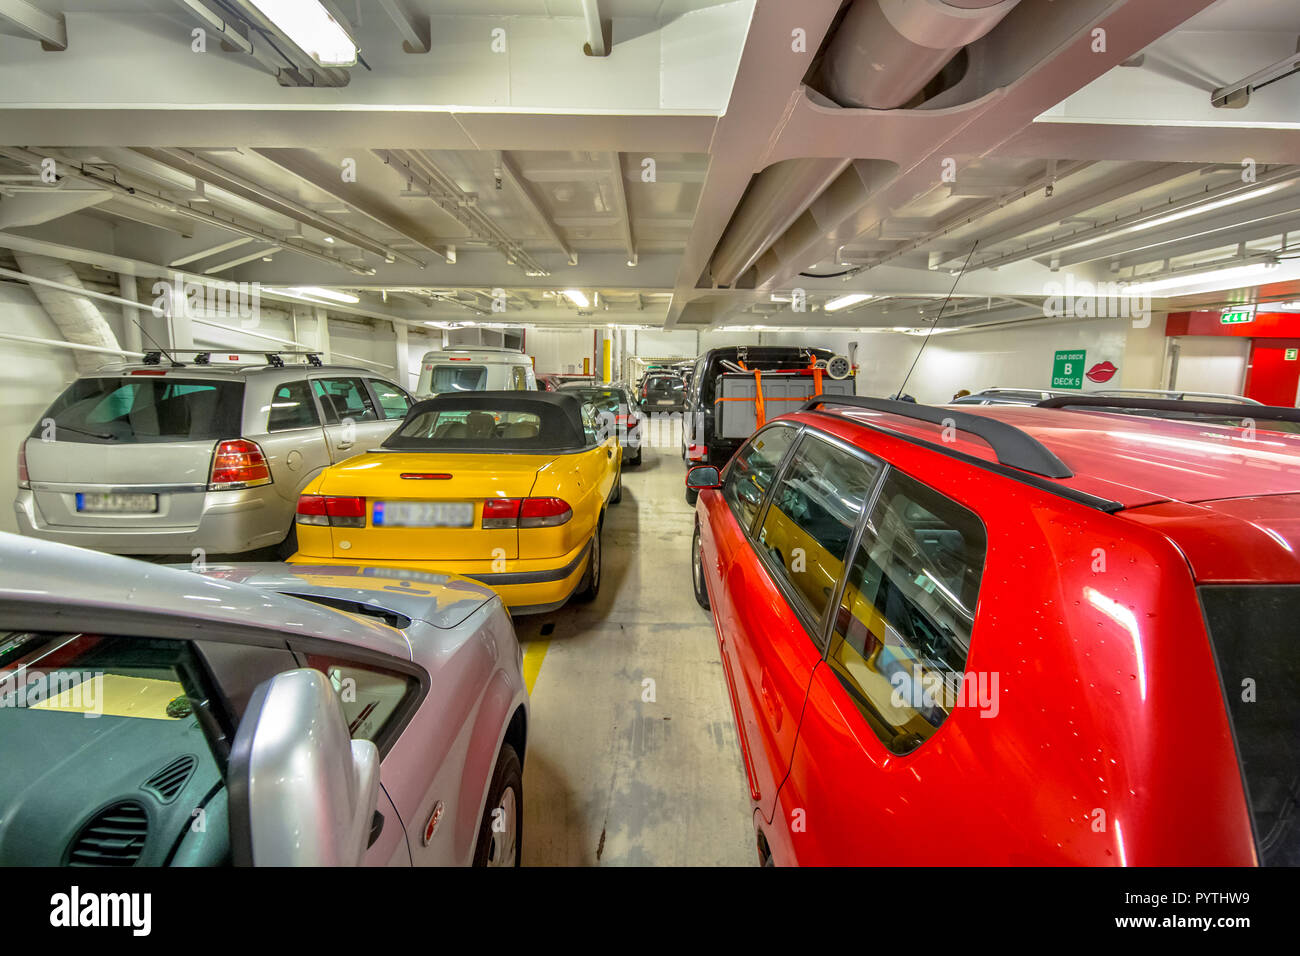 Passenger cars in the interior of marine ferry in Europe Stock Photo